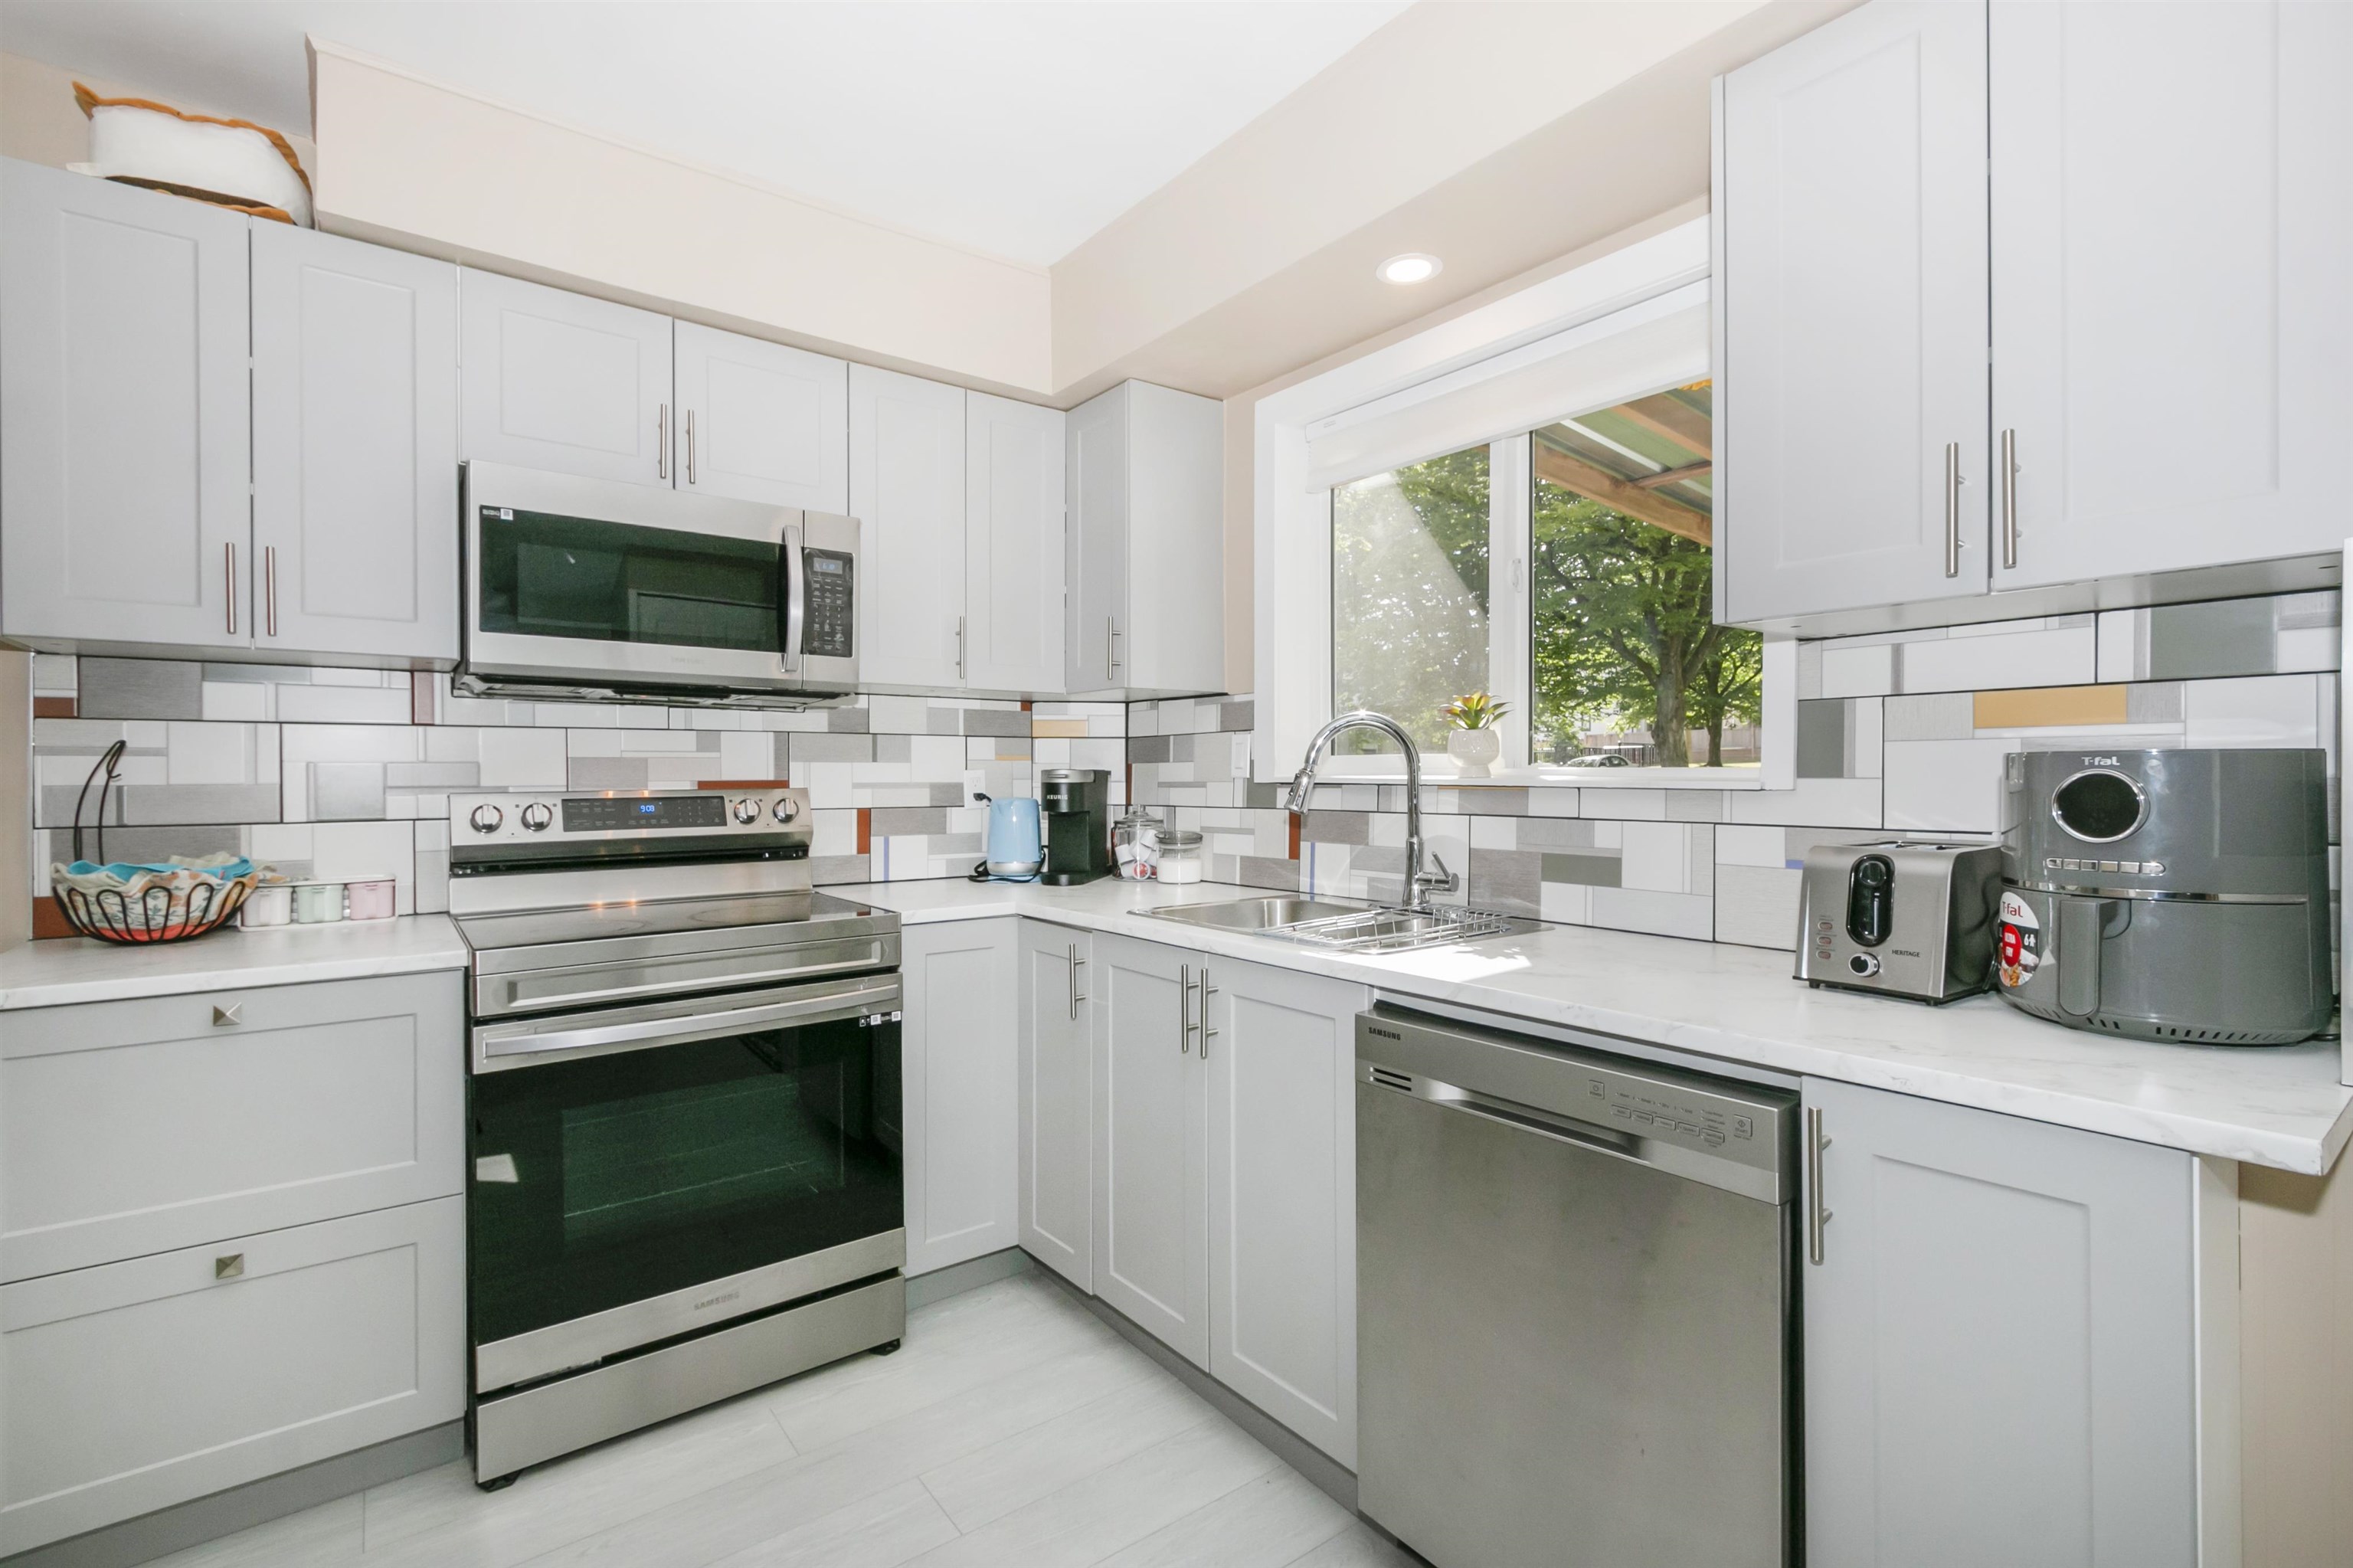 Listing image of 3625 MONMOUTH AVENUE